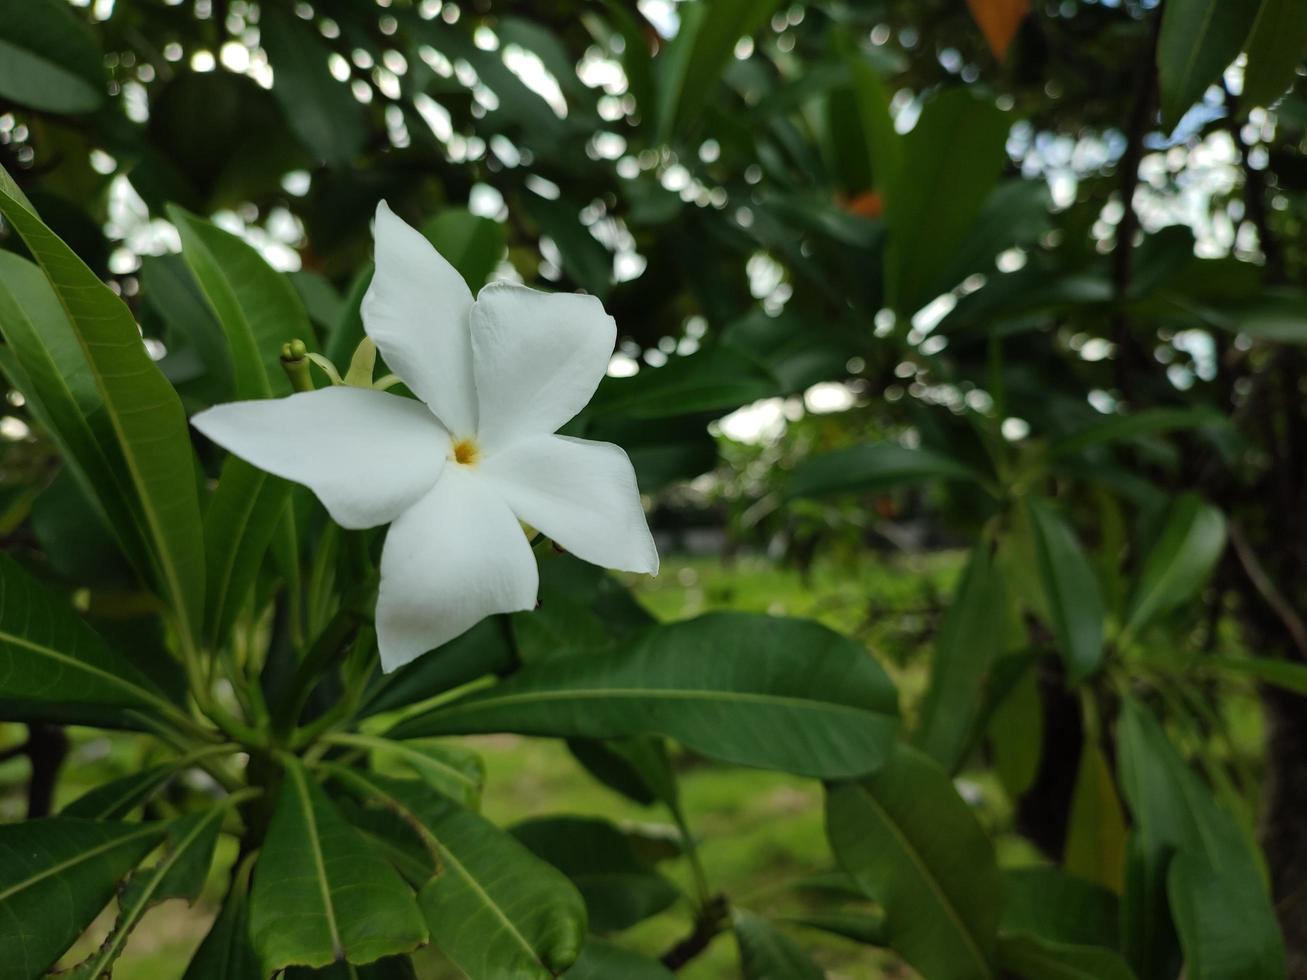 flower of the pong-pong tree or with the scientific name Cerbera odollam photo